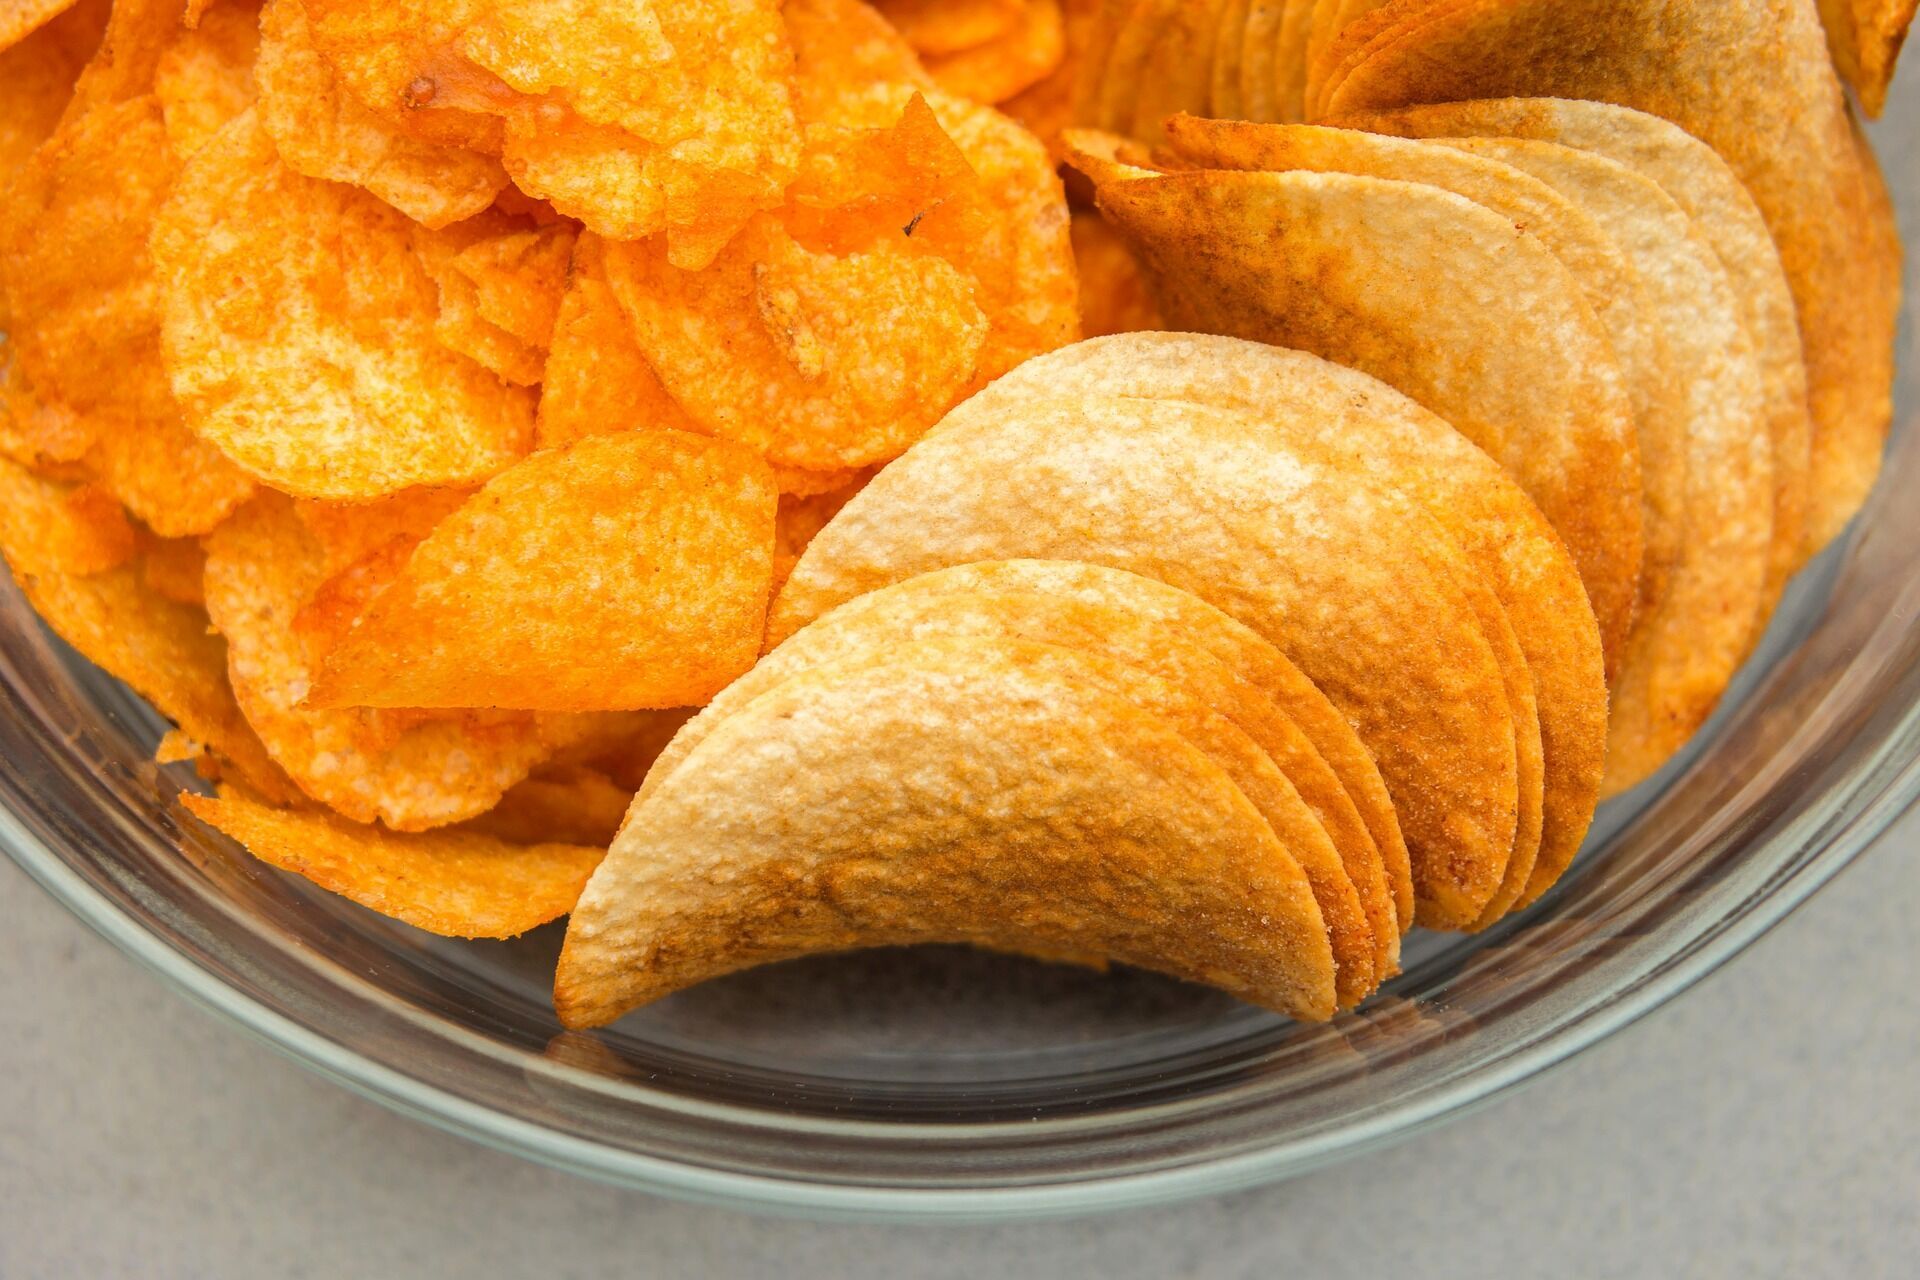 Chips are a very harmful product